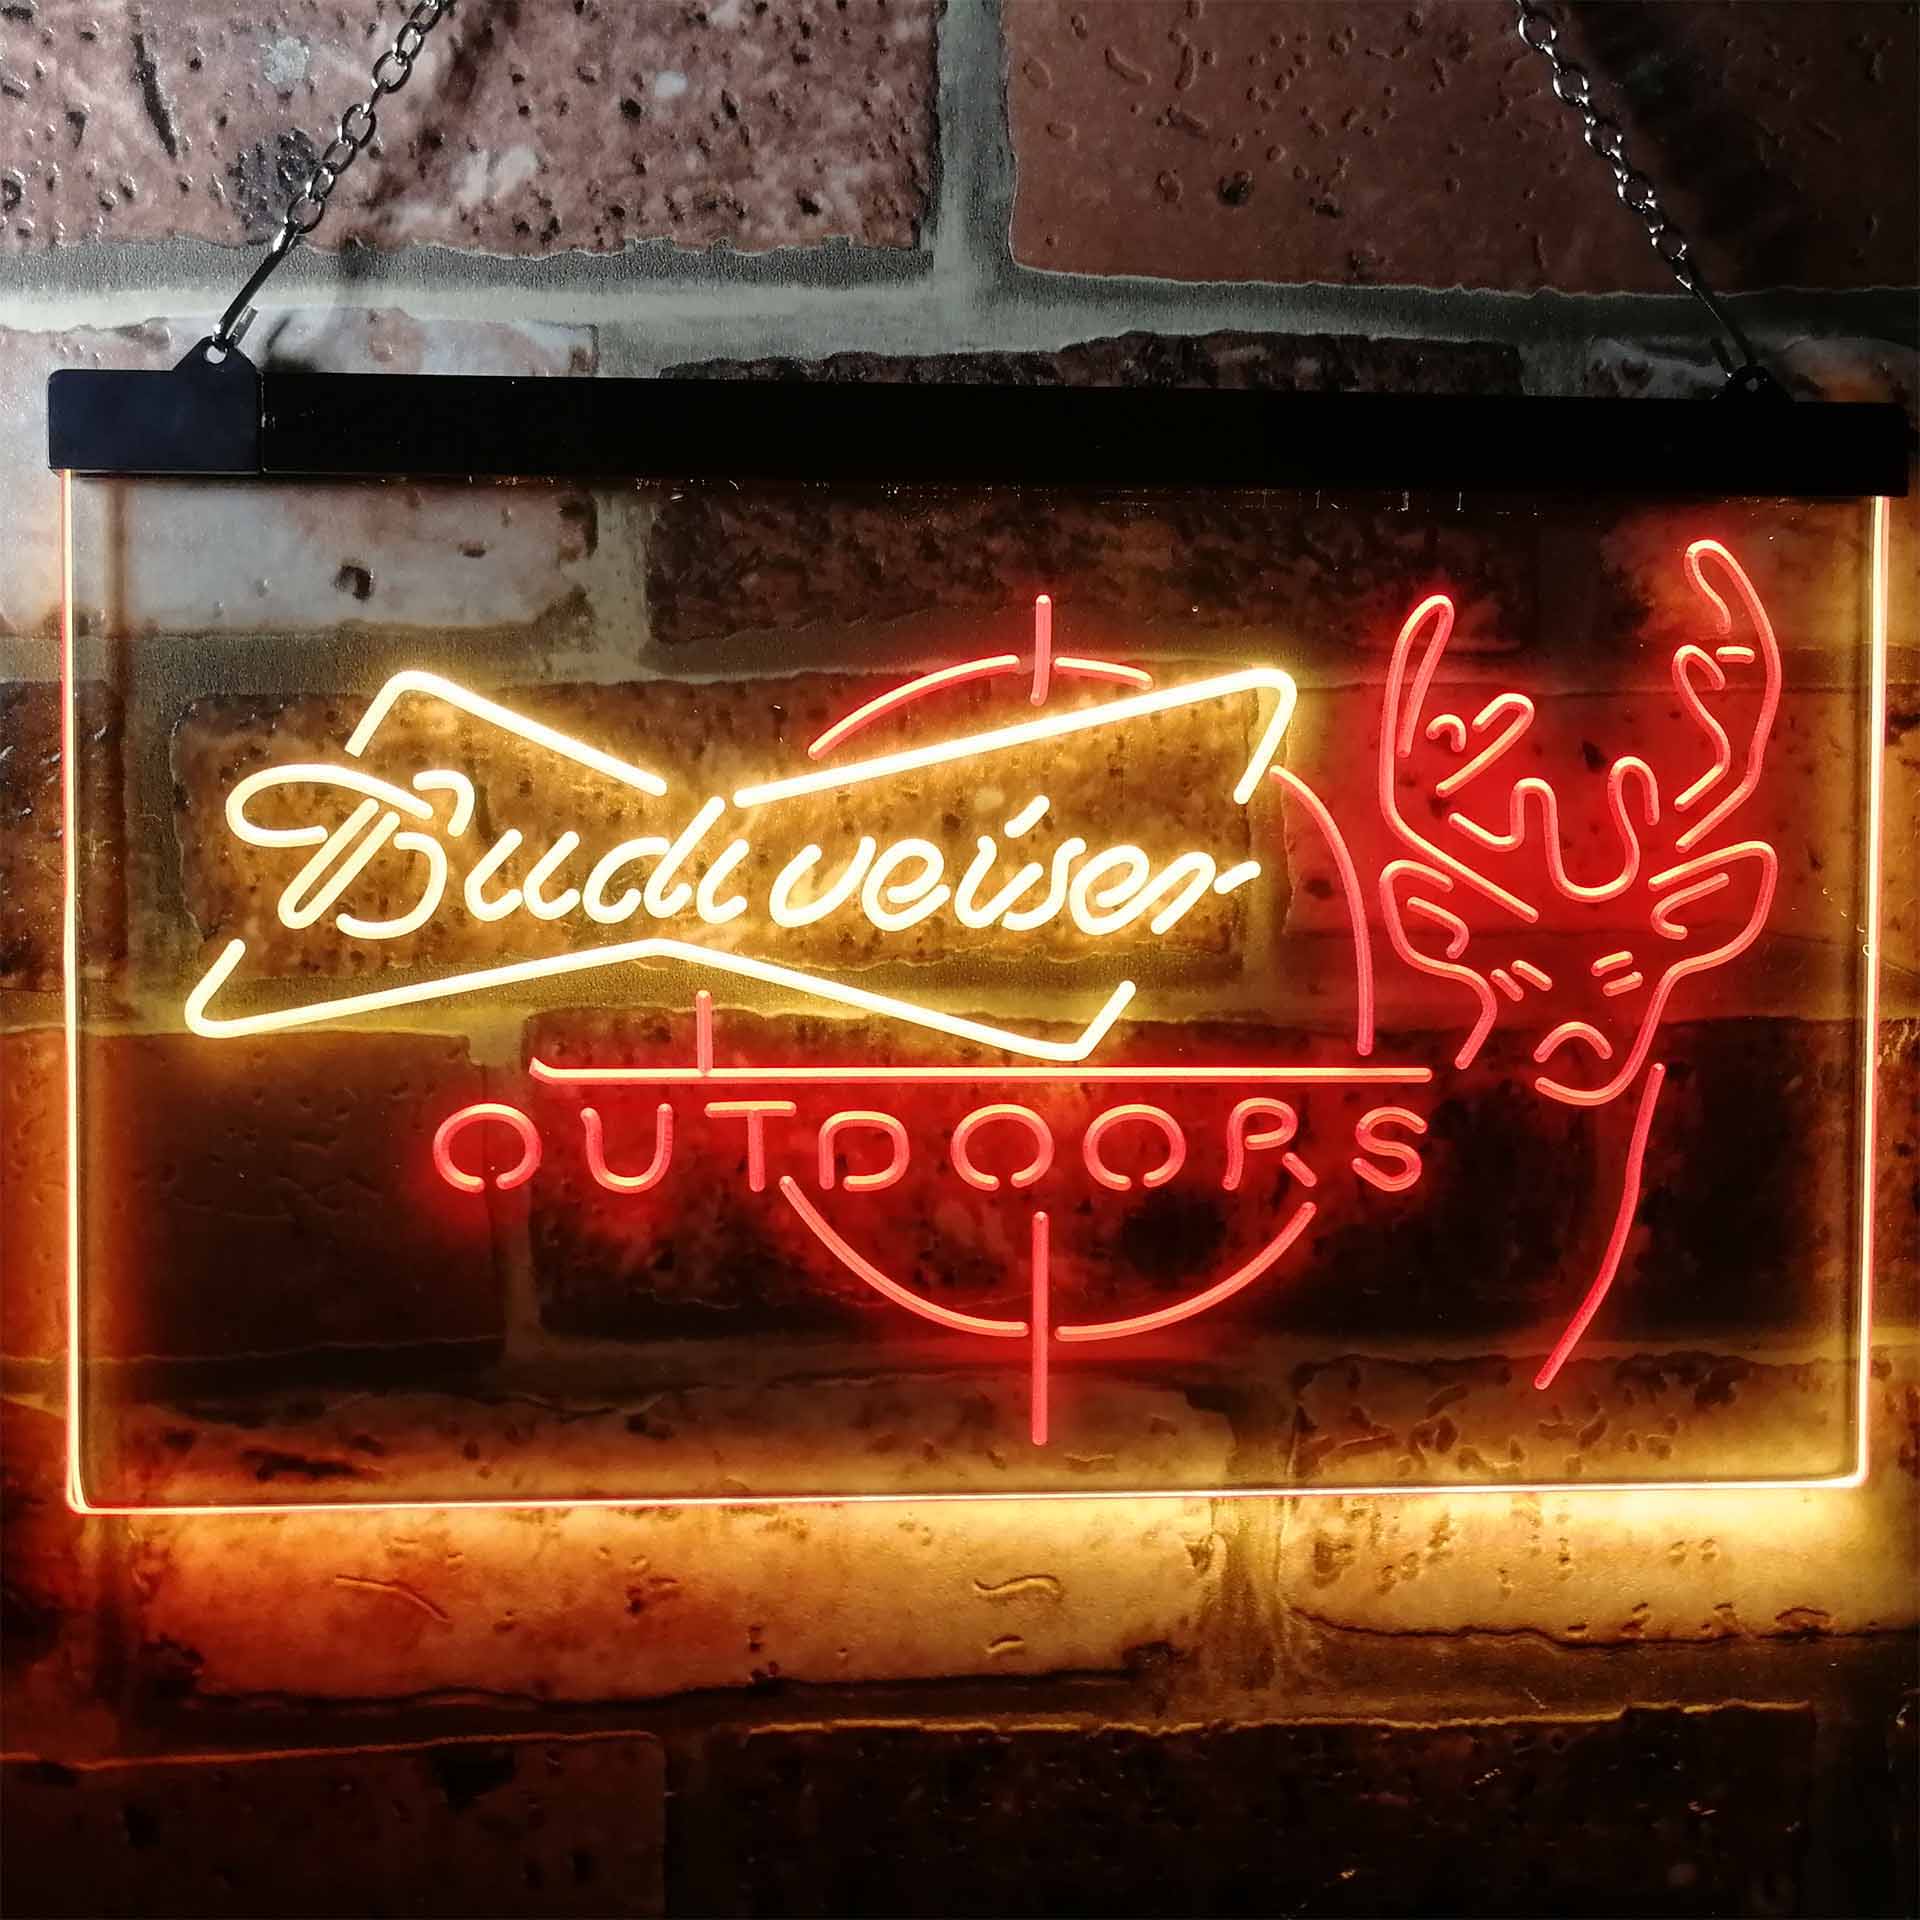 Budweiser Outdoor Hunting Cabin Deer Decor Dual Color LED Neon Sign ProLedSign